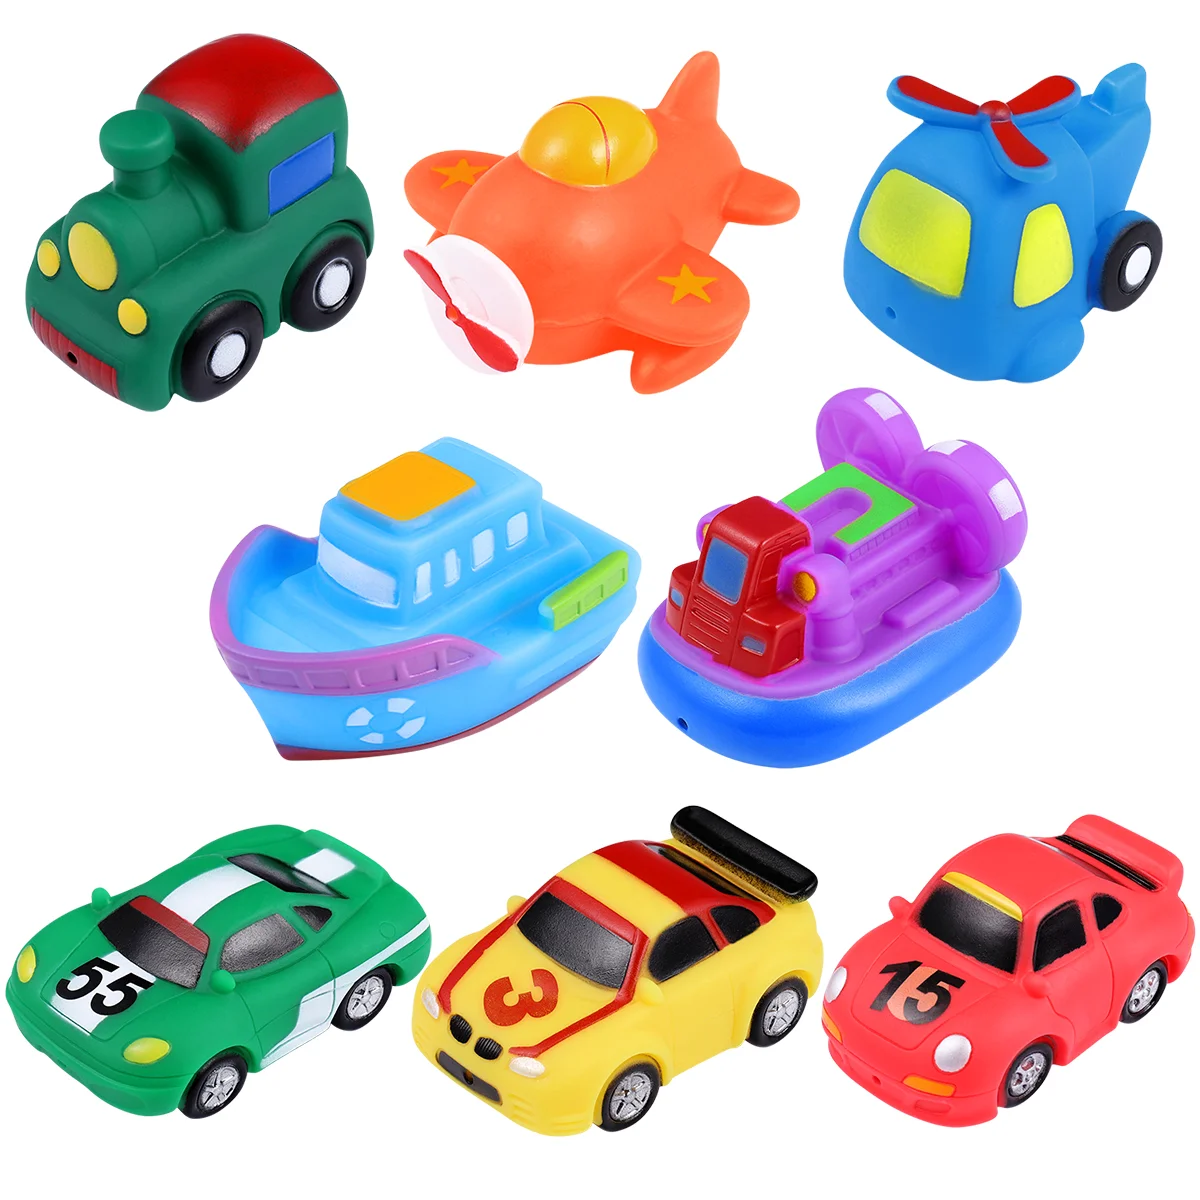 

Squeeze Sound Bath Toy Children’s Toys Spray Water Bathtime for Toddlers Vehicle Bathing Baby Childrens